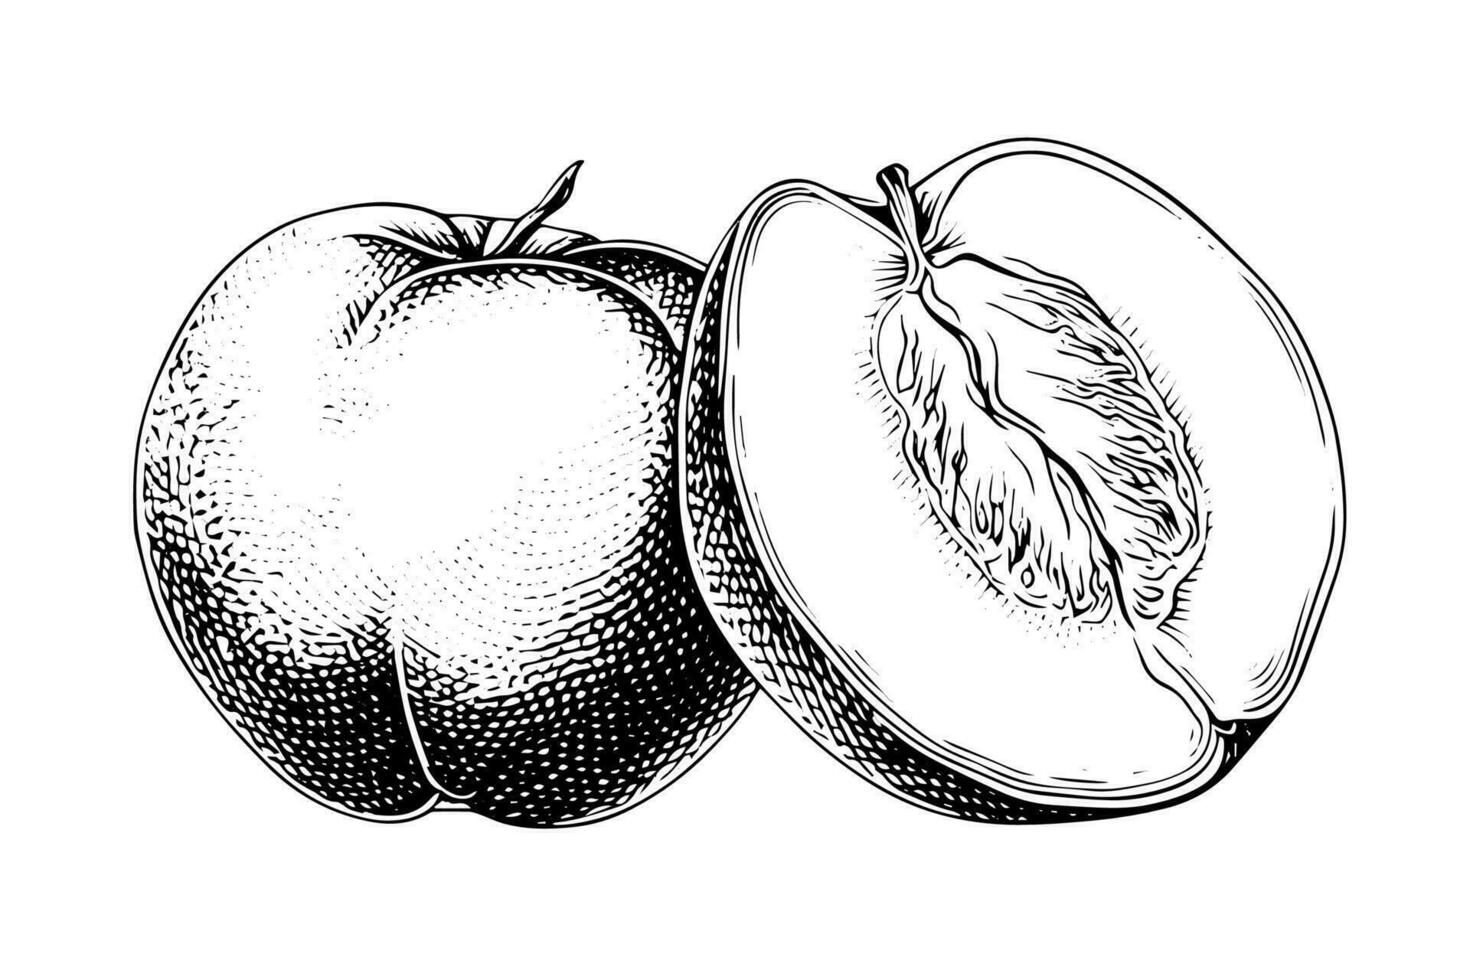 Peach or Apricot fruit hand drawn sketch in engraved style. vector